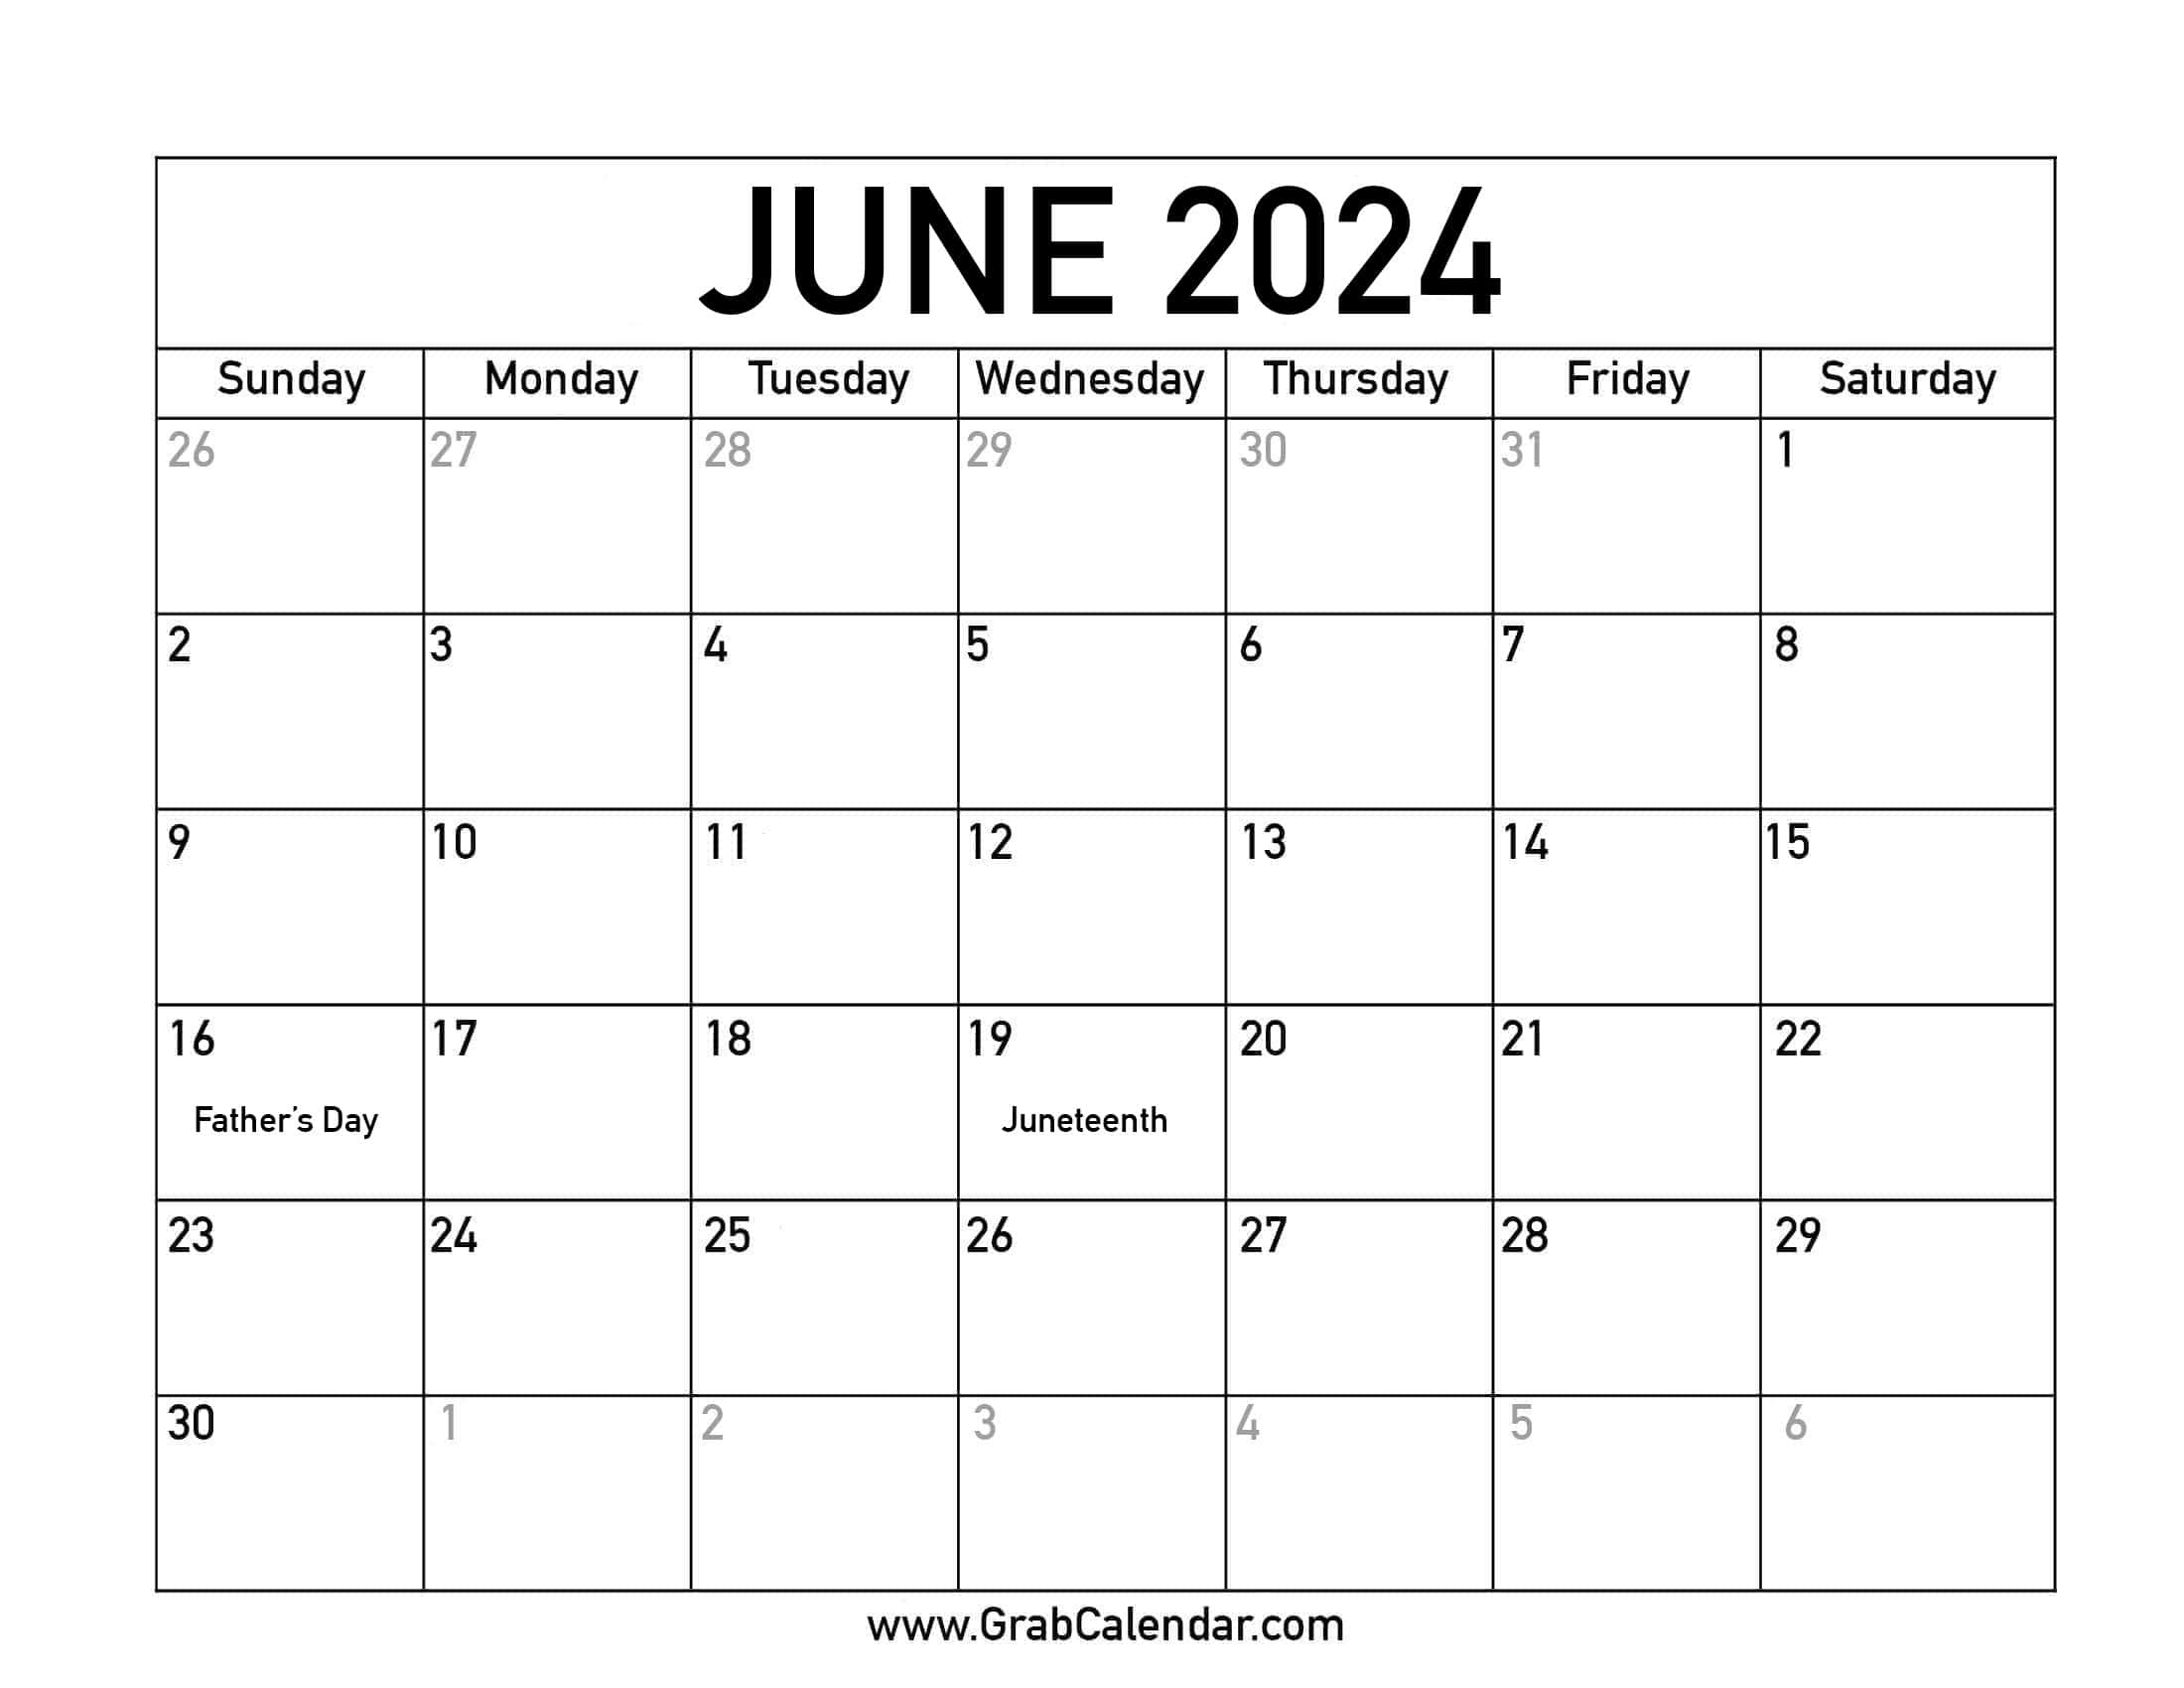 Printable June 2024 Calendar with regard to Calendar For June 2024 With Holidays